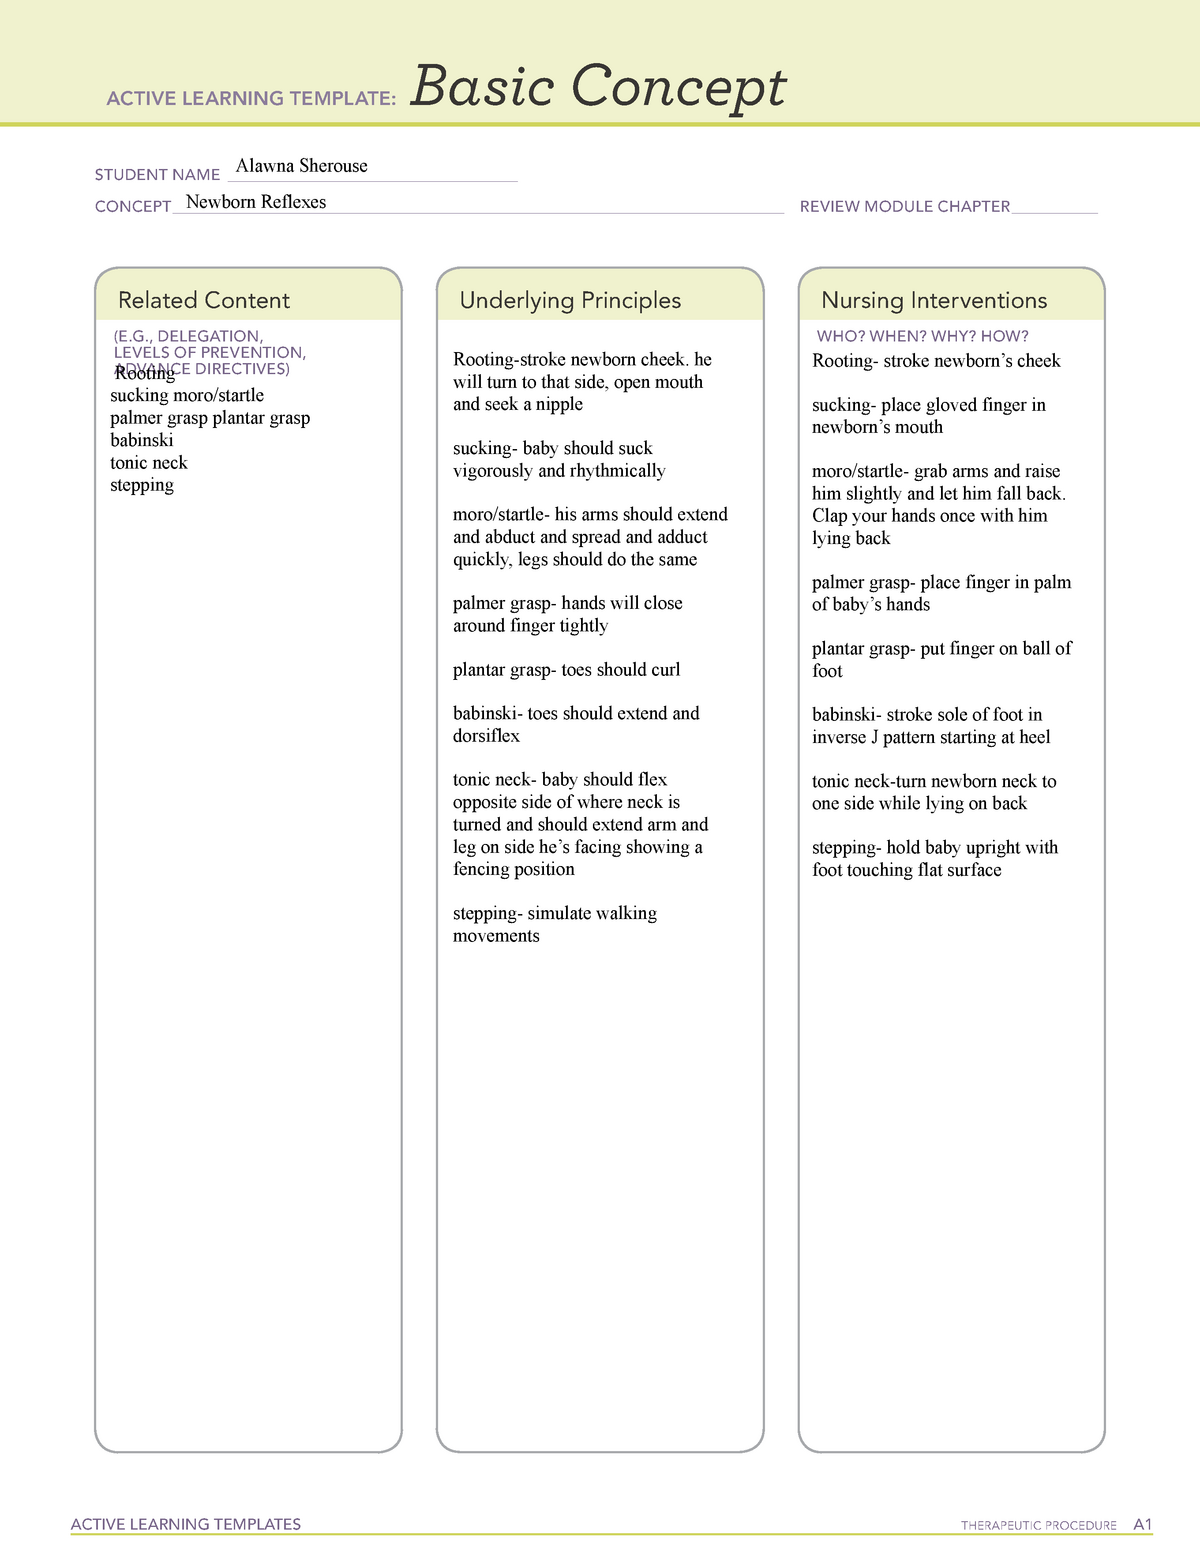 Active Learning Template Basic Concept4 NURS320 ACTIVE LEARNING